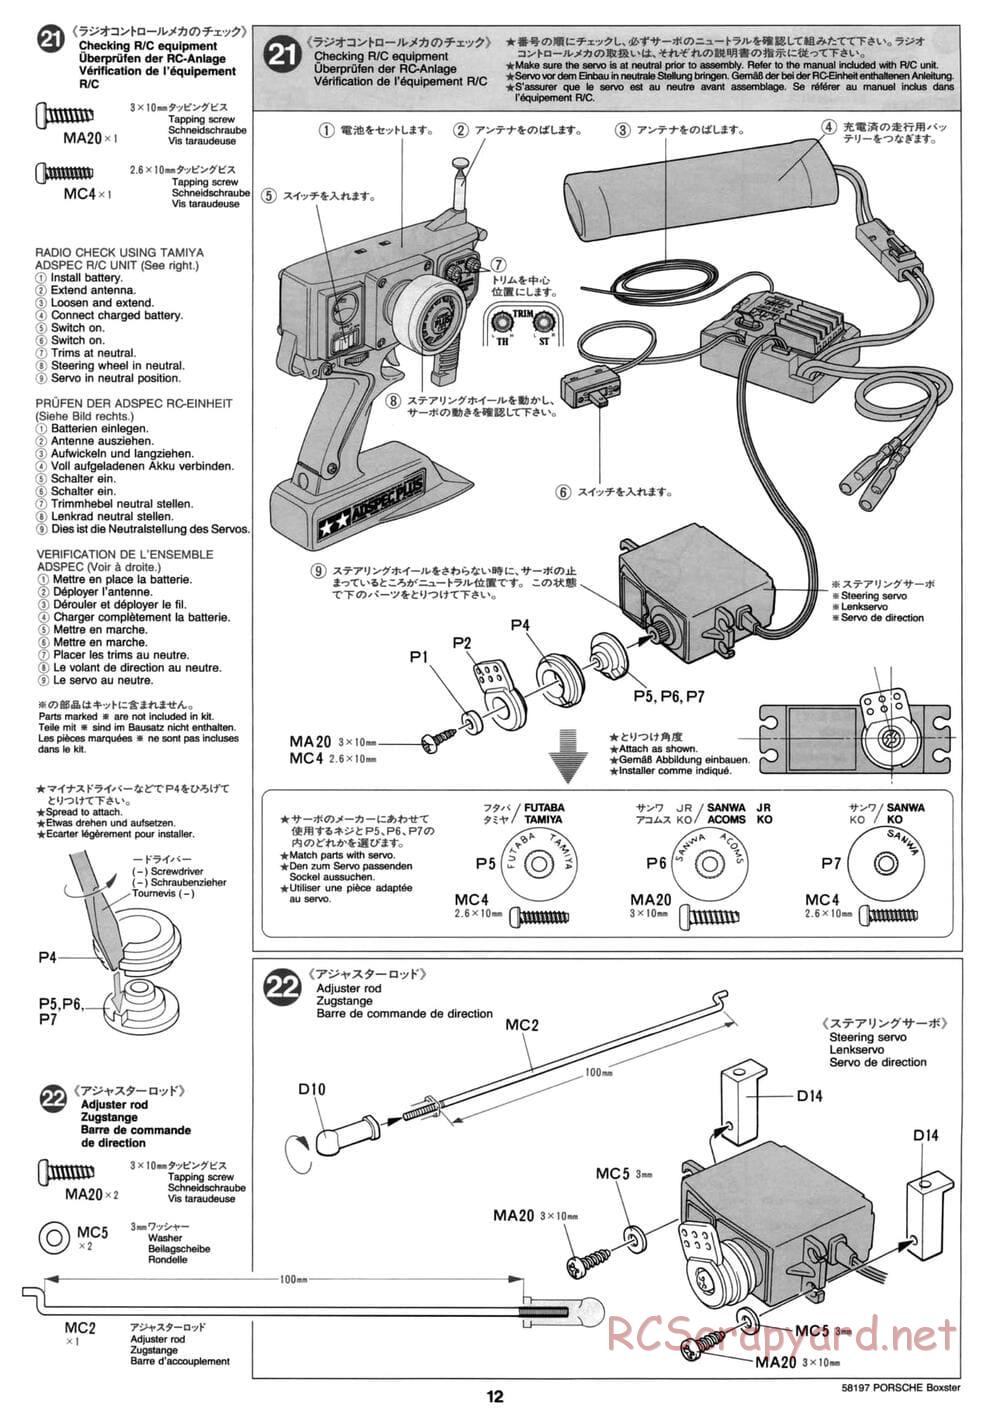 Tamiya - Porsche Boxster - M02L Chassis - Manual - Page 12